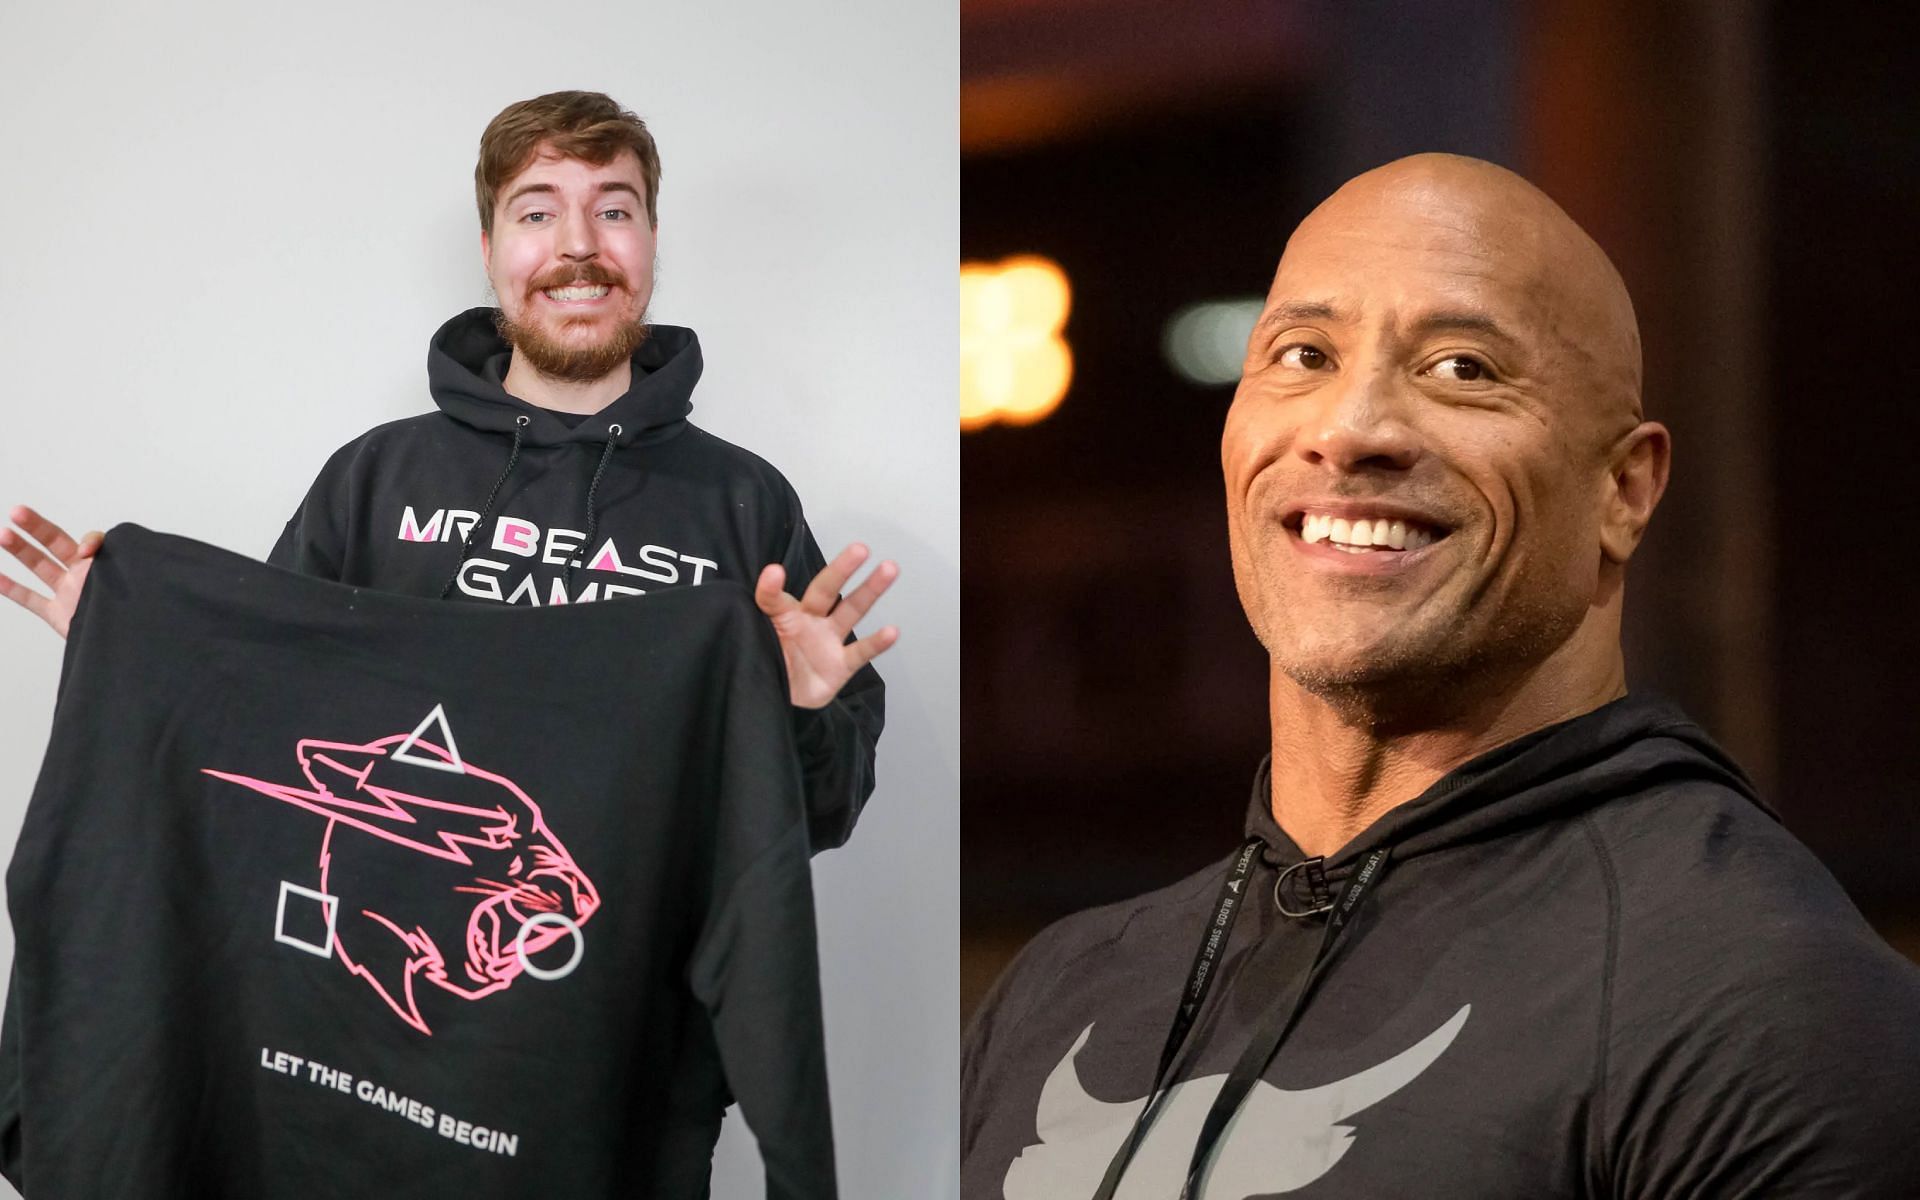 MrBeast and The Rock wagered $100,000 in a Rock, Paper, and Scissors game (Image via Sportskeeda)